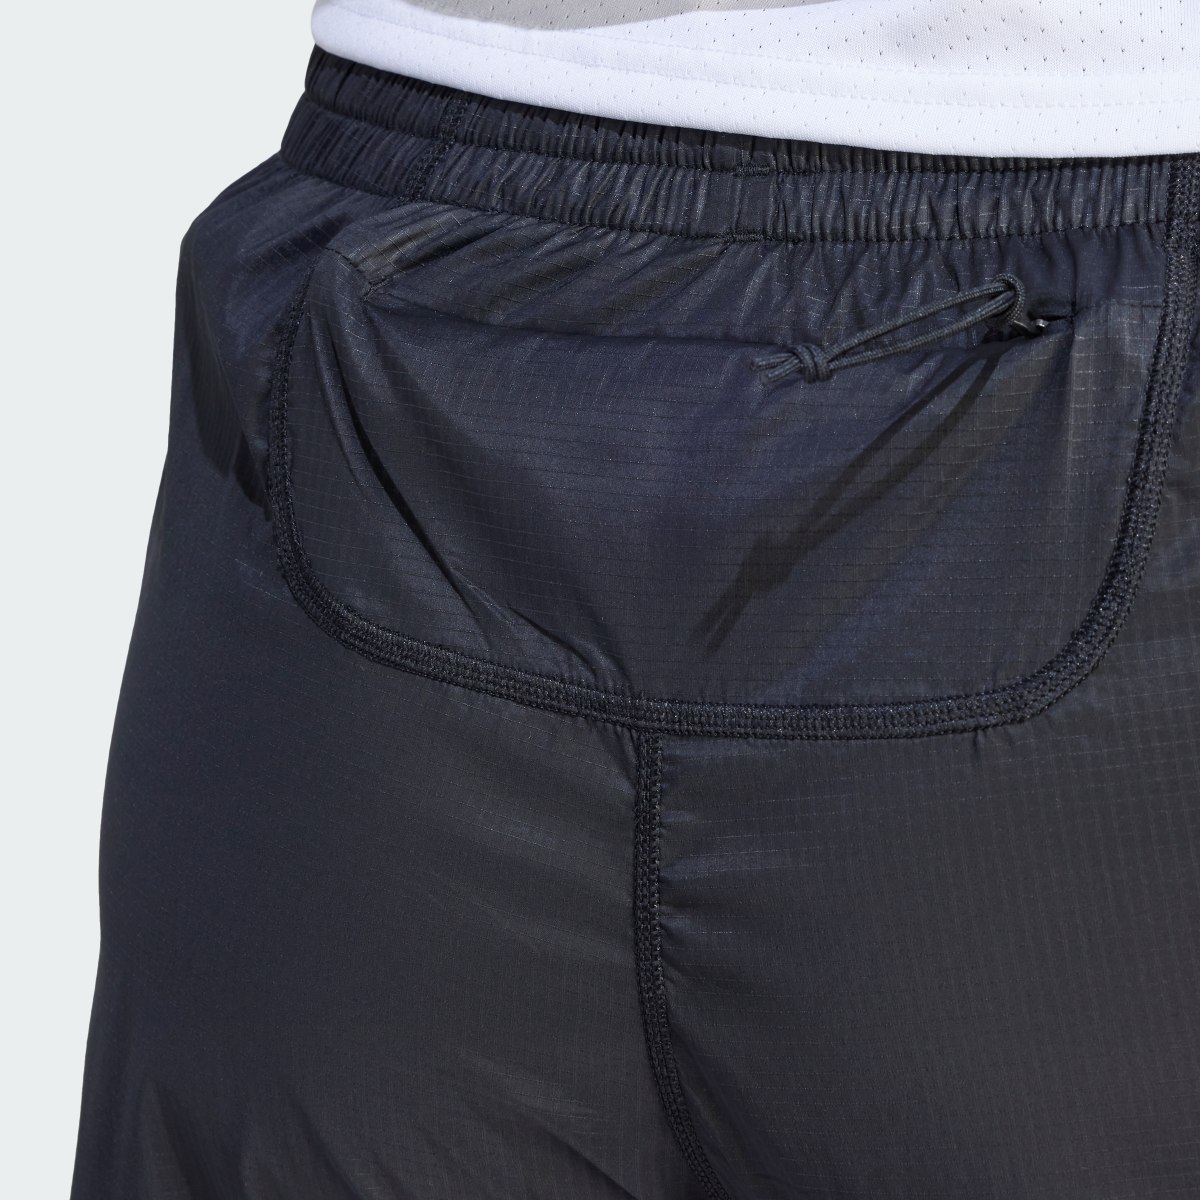 Adidas Berlin Running Two-in-One Shorts - IL2530